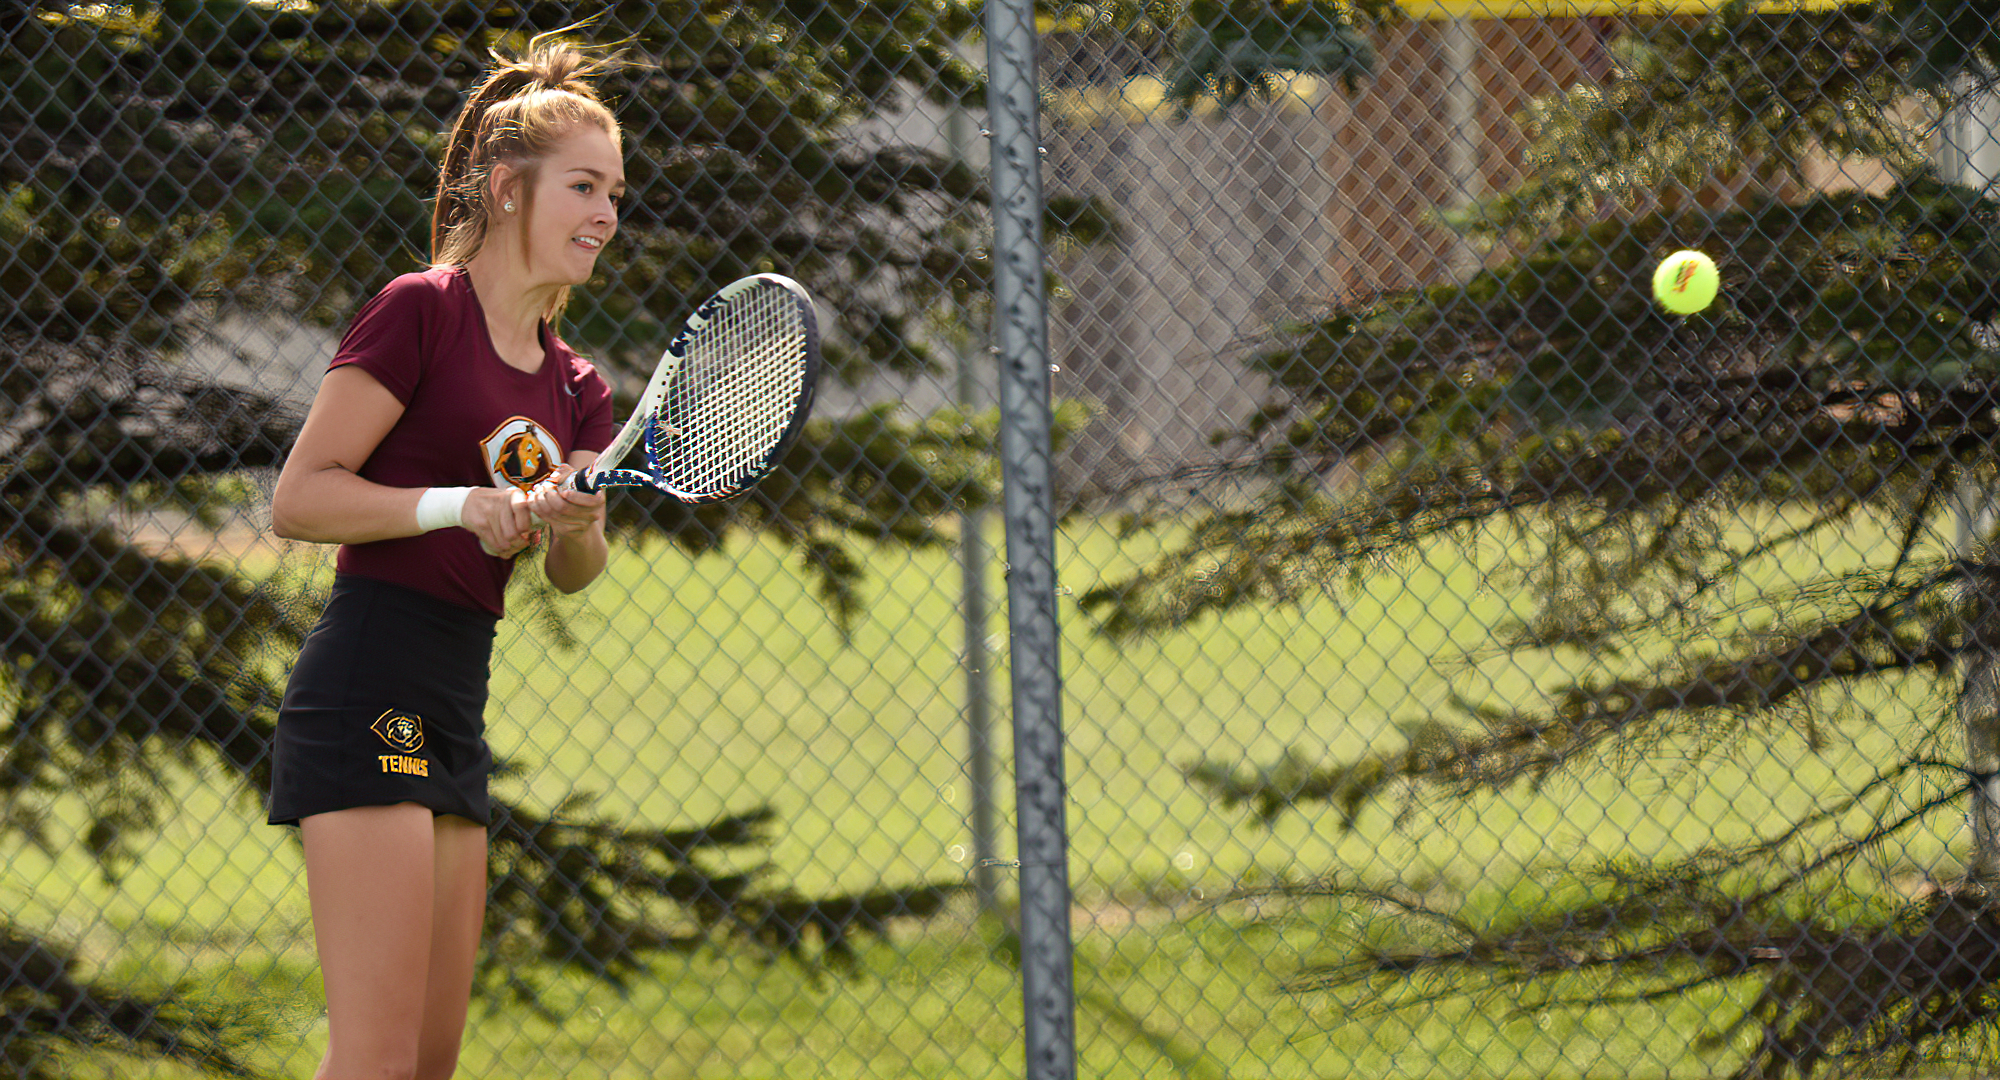 Sophomore Raquel Egge won 6-3, 6-3 in the Cobbers' final match of the year at St. Olaf. It was her team-leading fifth win of the year and she has claimed 12 singles victories in her first two years at CC.